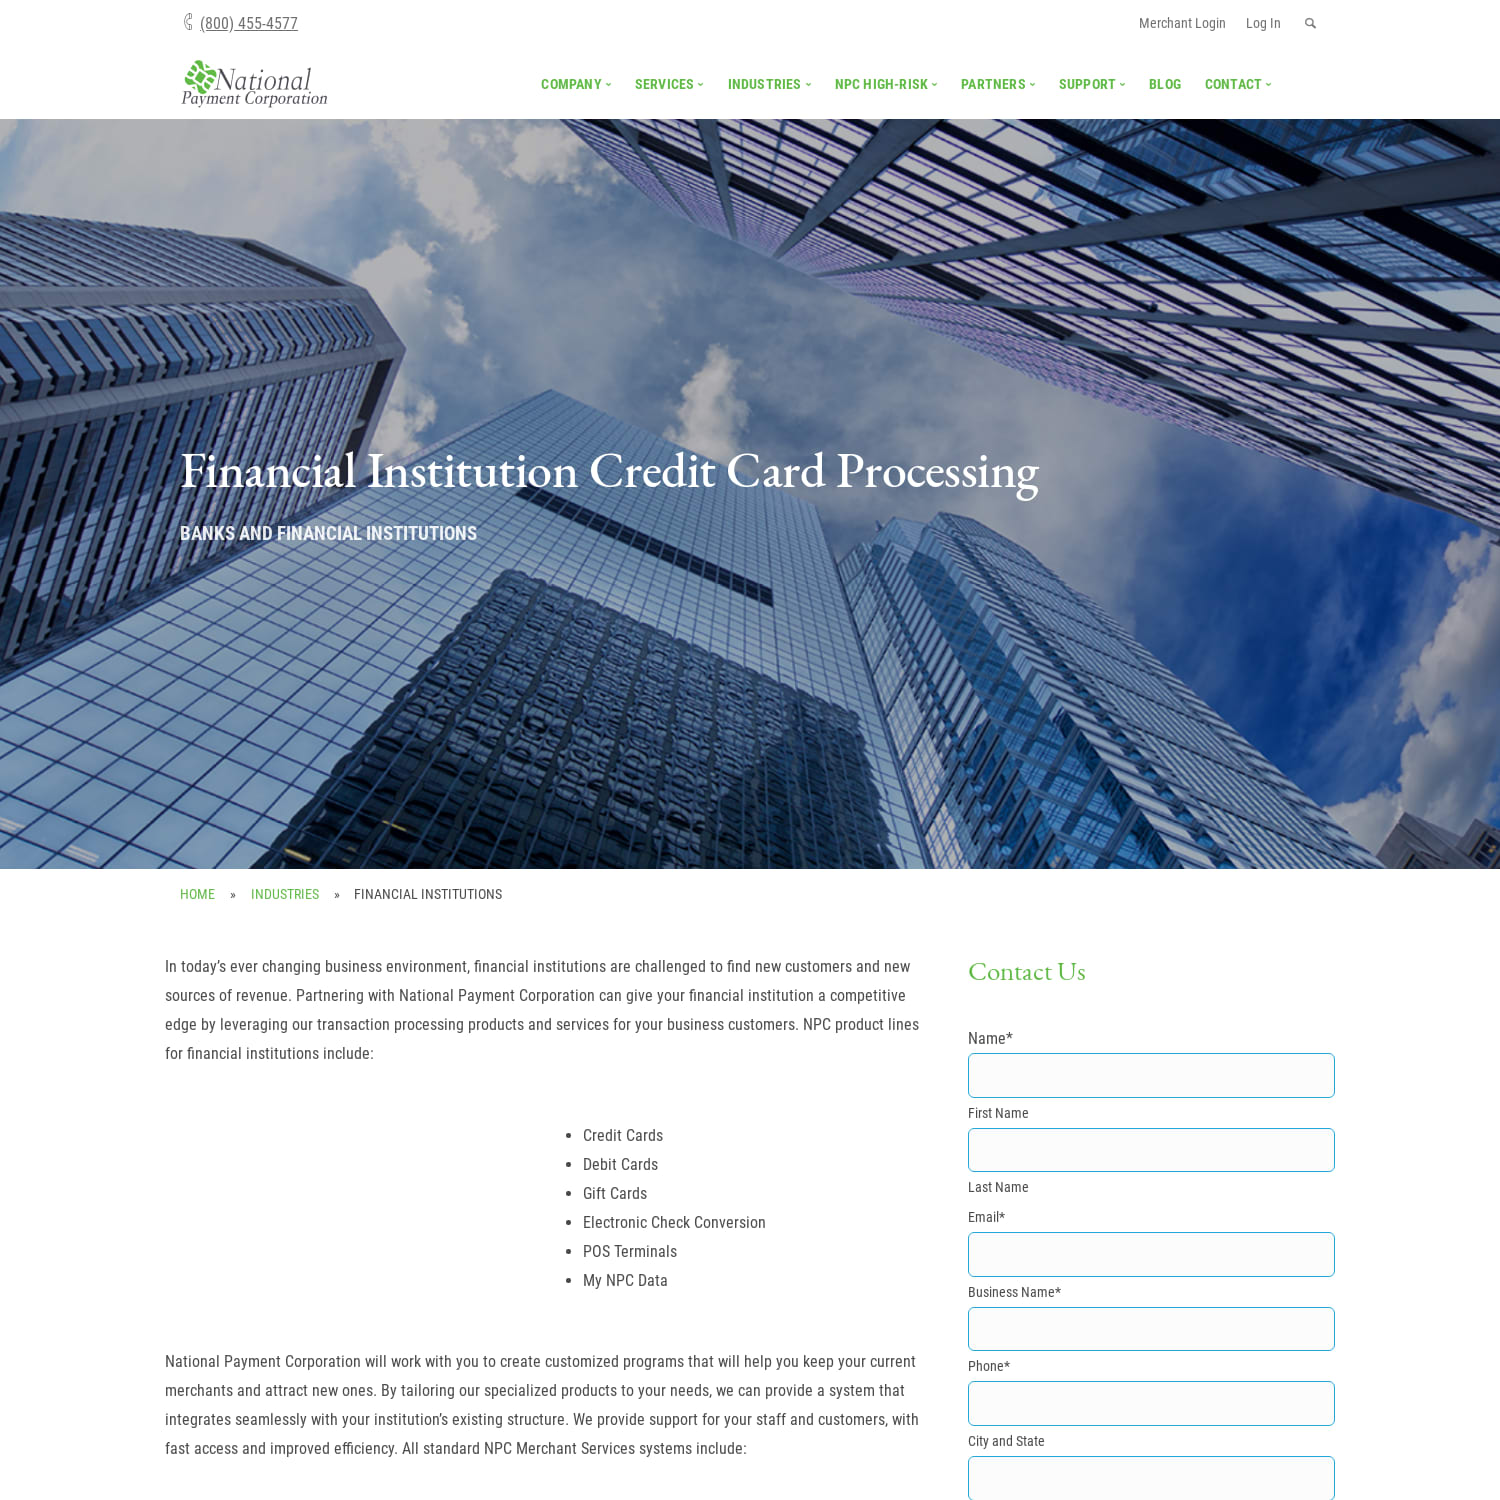 Financial Institutions - National Payment Corporation